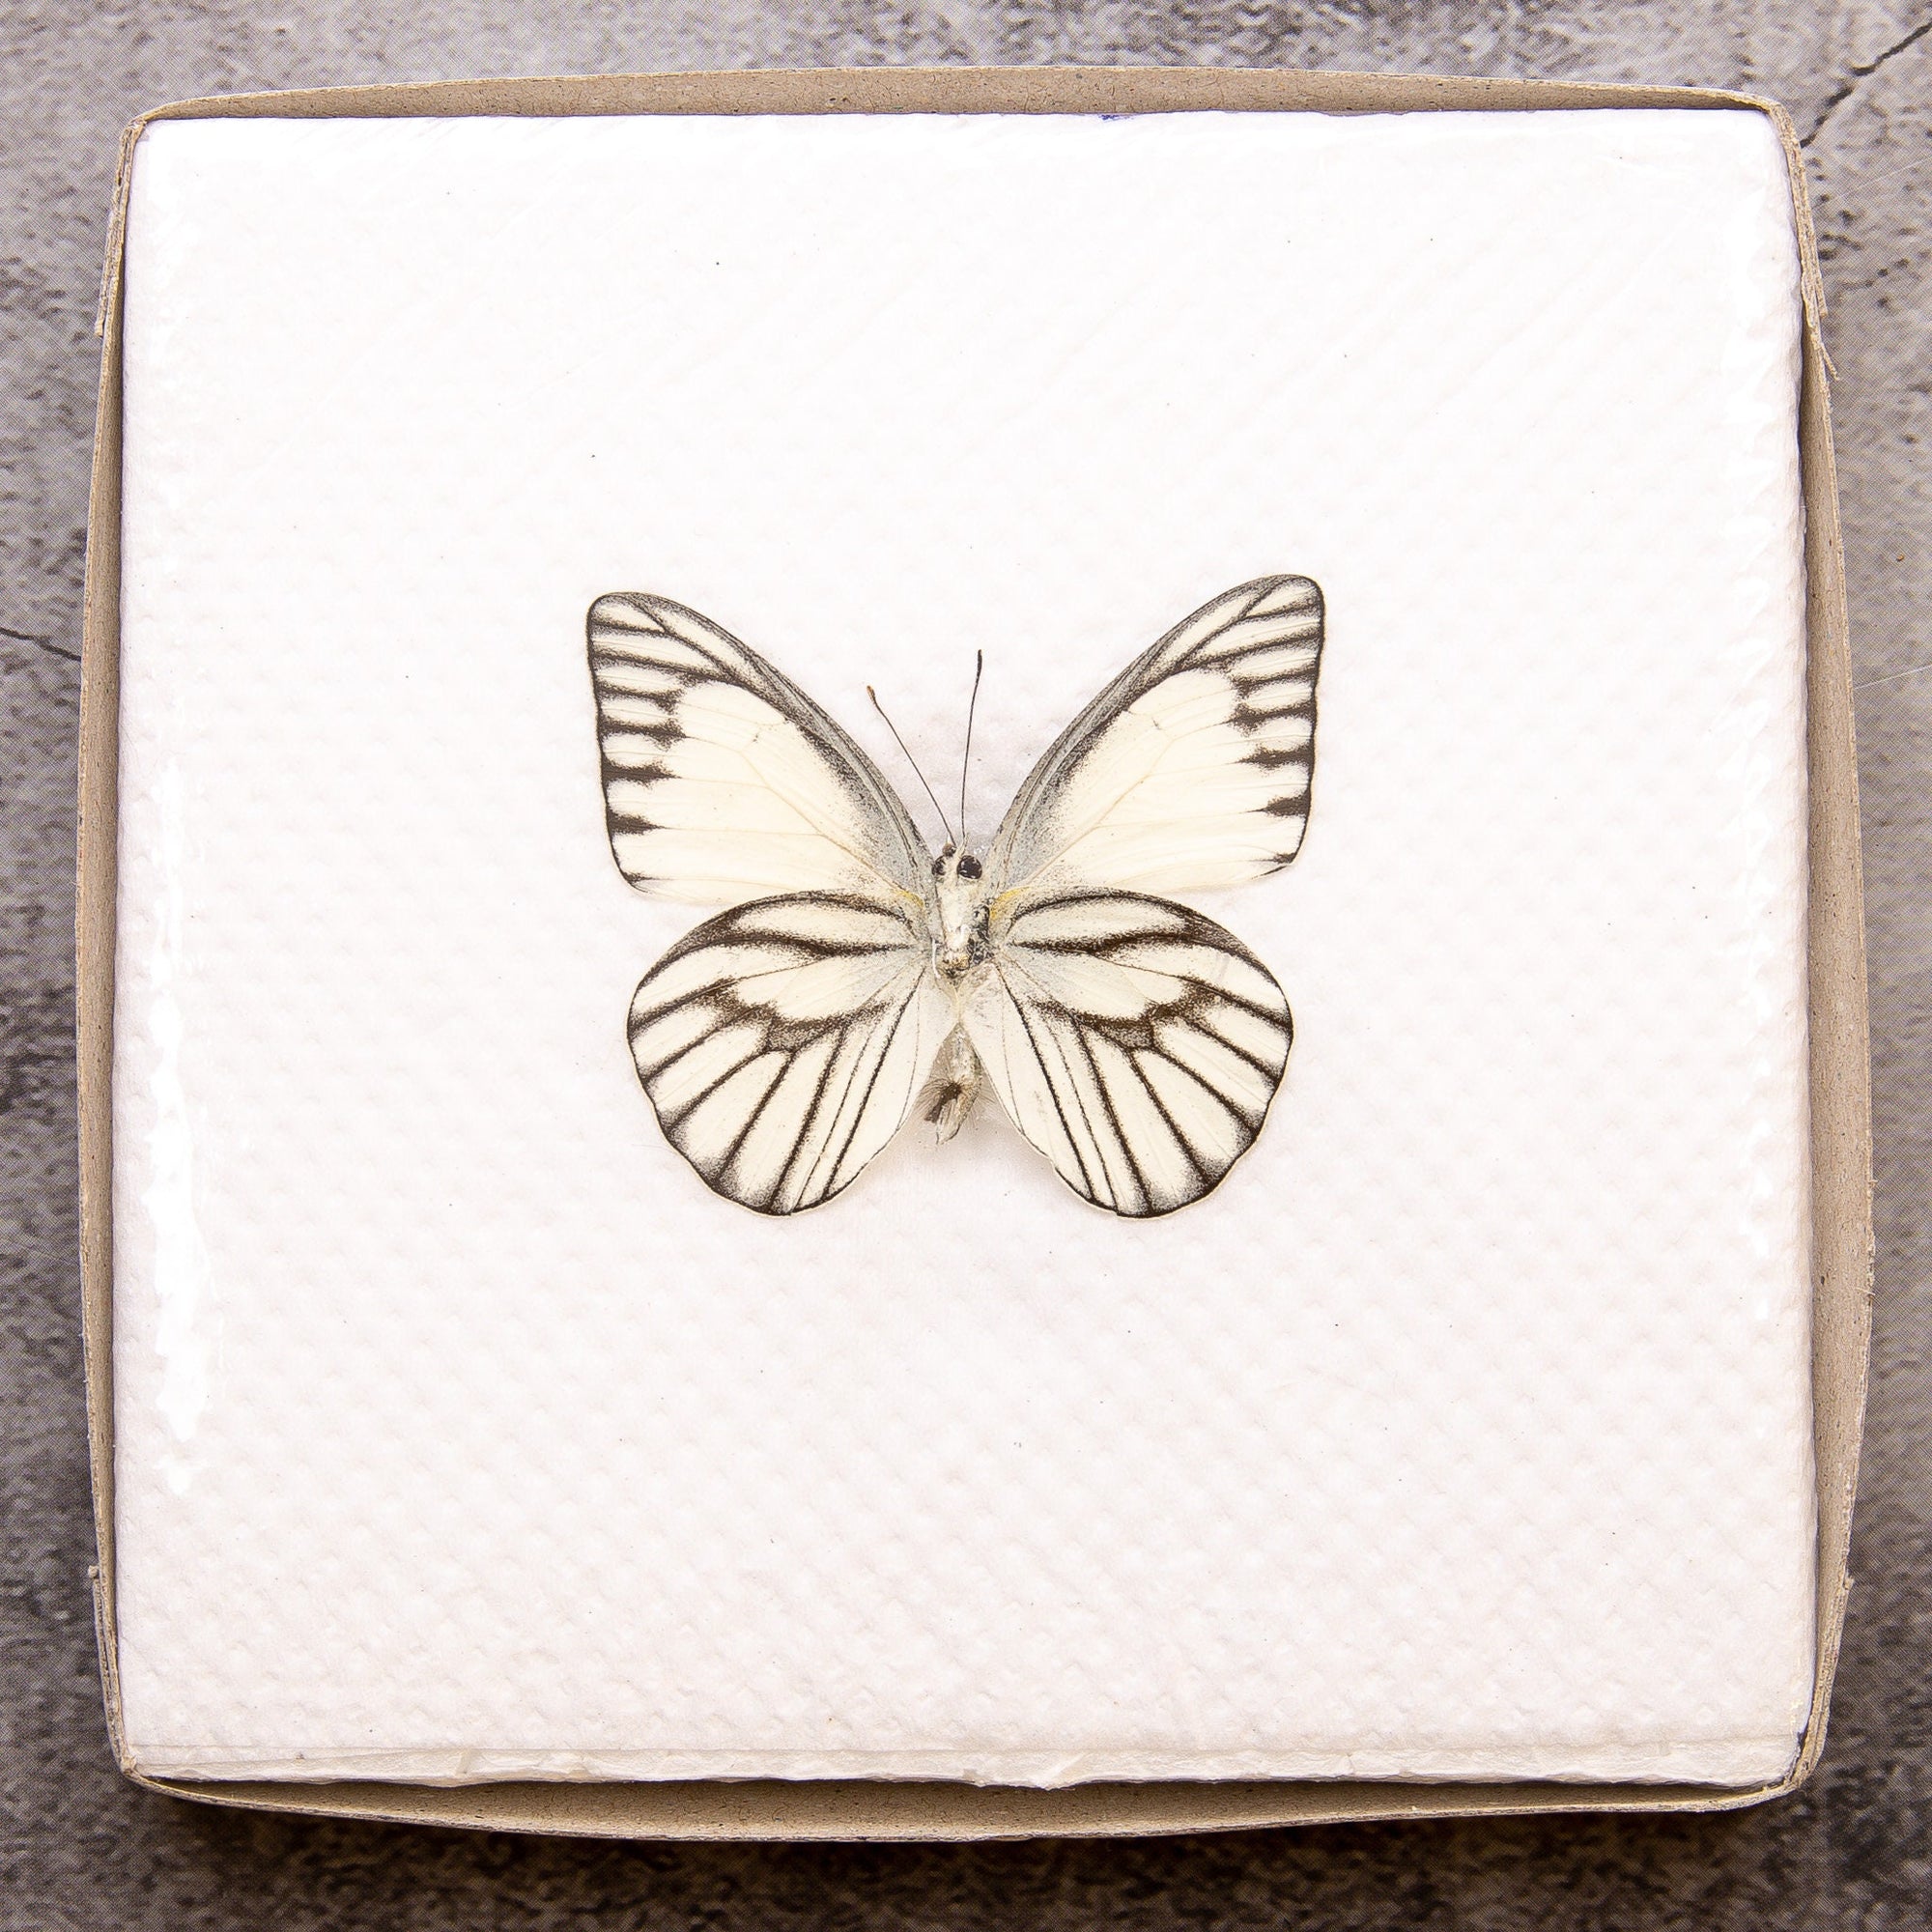 Pack of 2 Striped Albatross Butterflies (Appias libythea) WINGS-SPREAD, Ethically Sourced Preserved Specimens for Collecting & Artistic